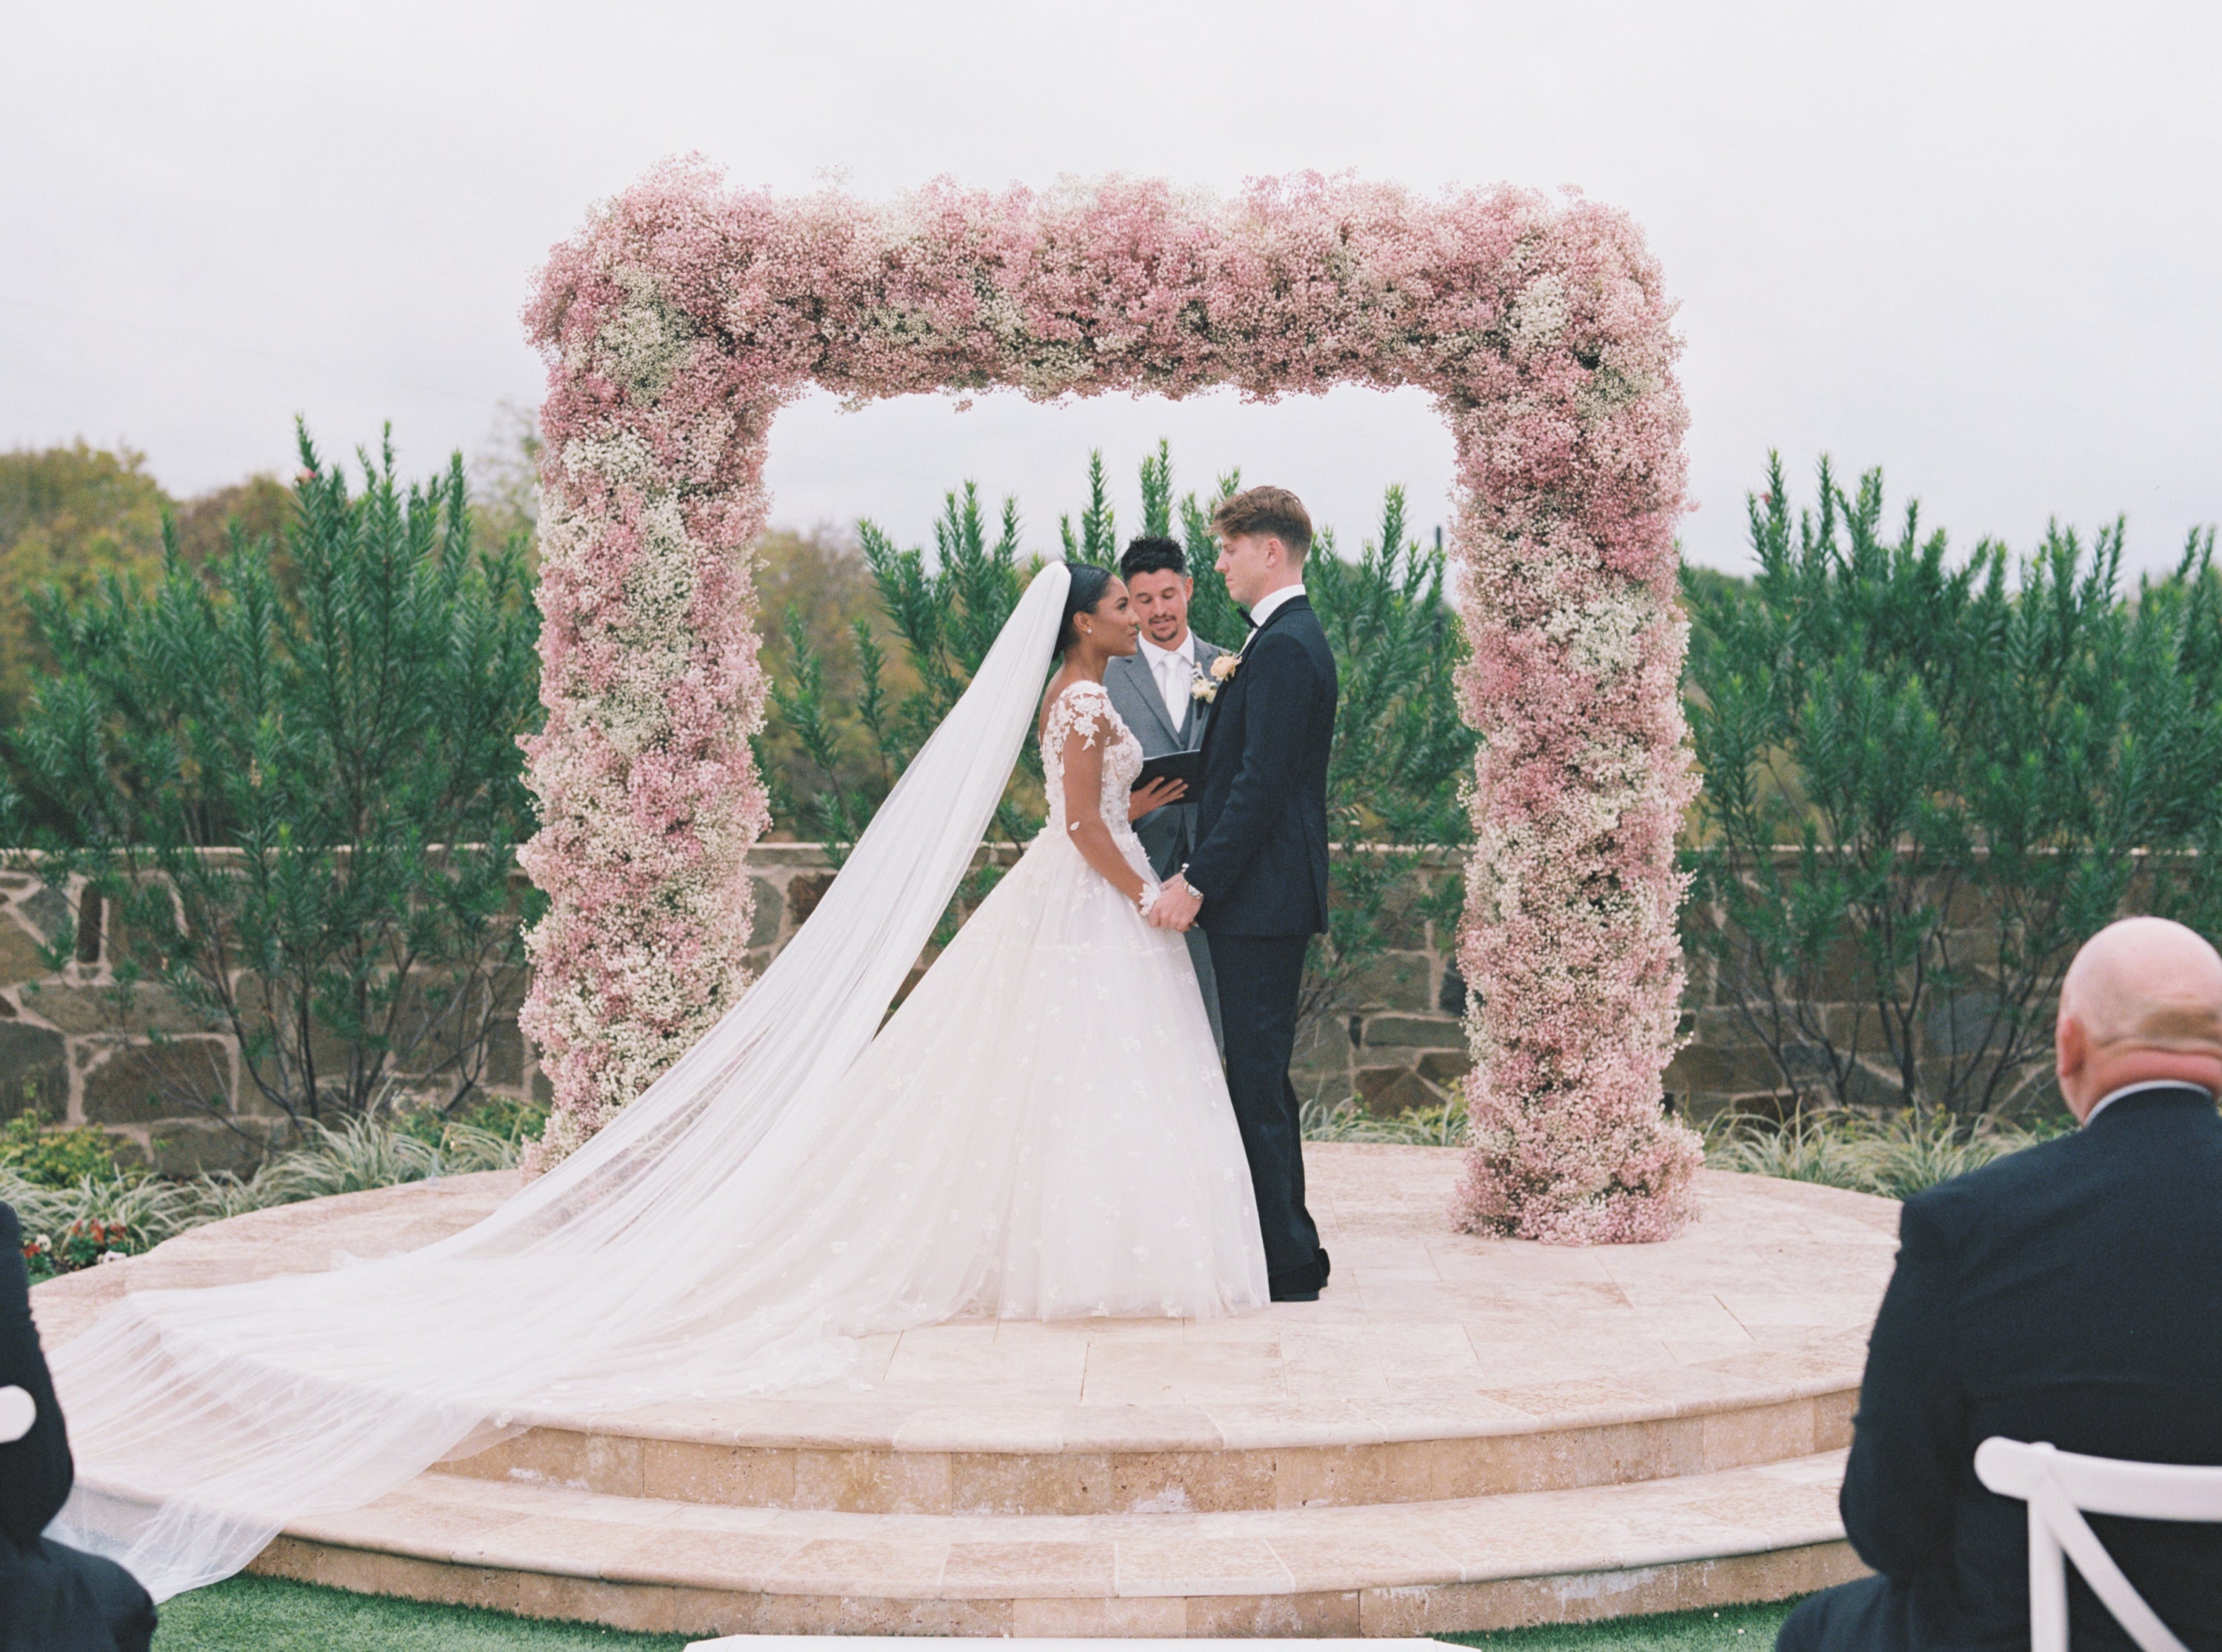 How did we become a part of the modern fairytale wedding of Tara and Hunter?